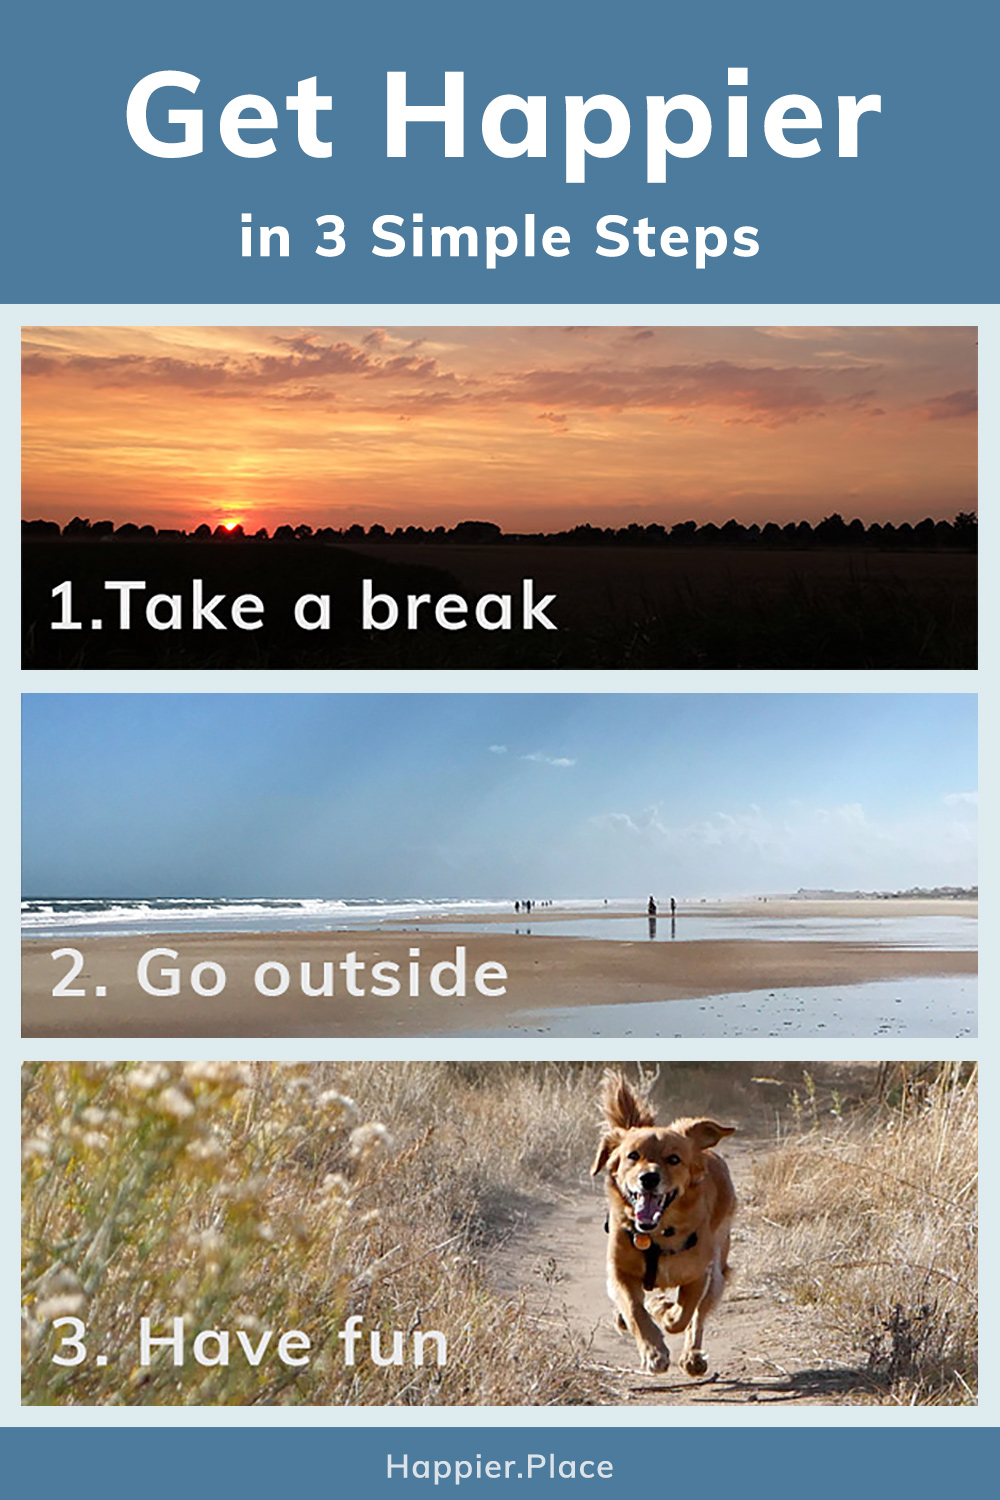 Get happier simple steps, take a break, go outside, have fun, sunset, beach, dog running,happier place